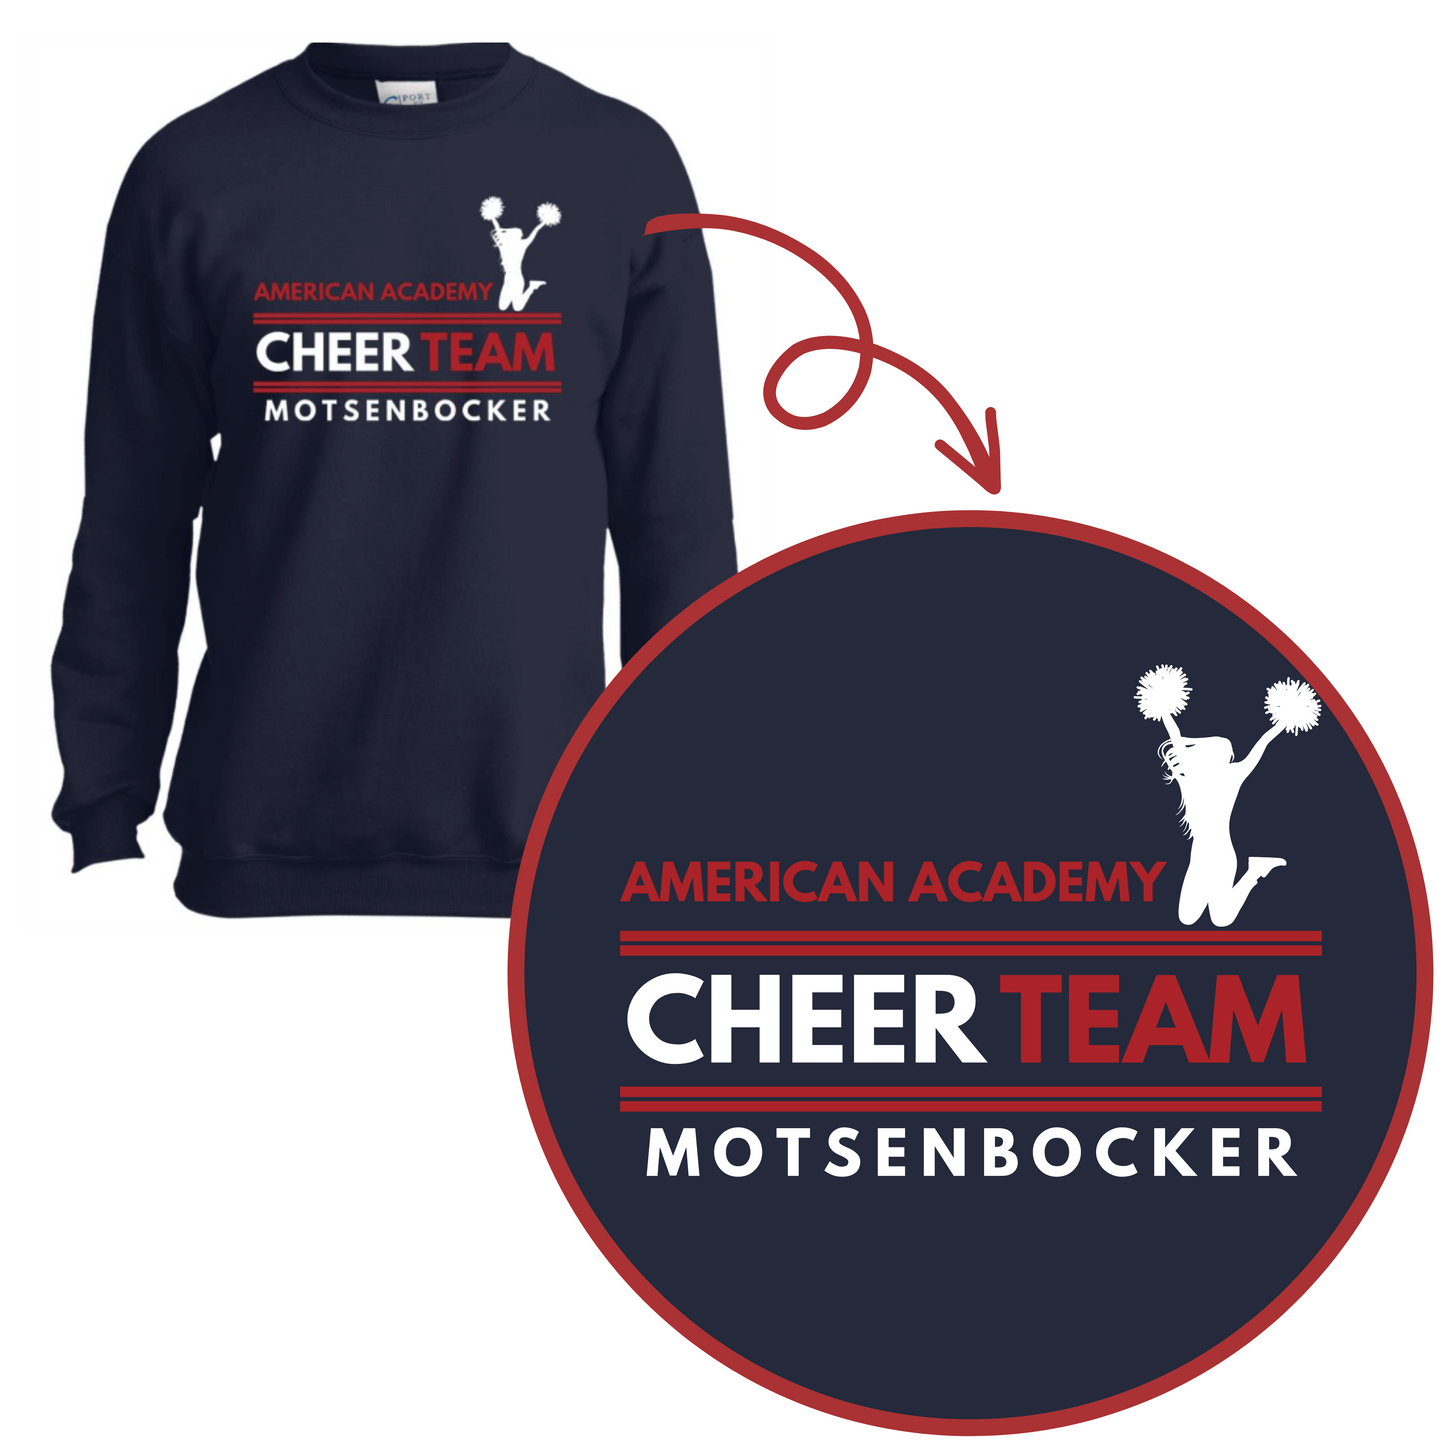 American Academy Cheer Team- Youth Sizes